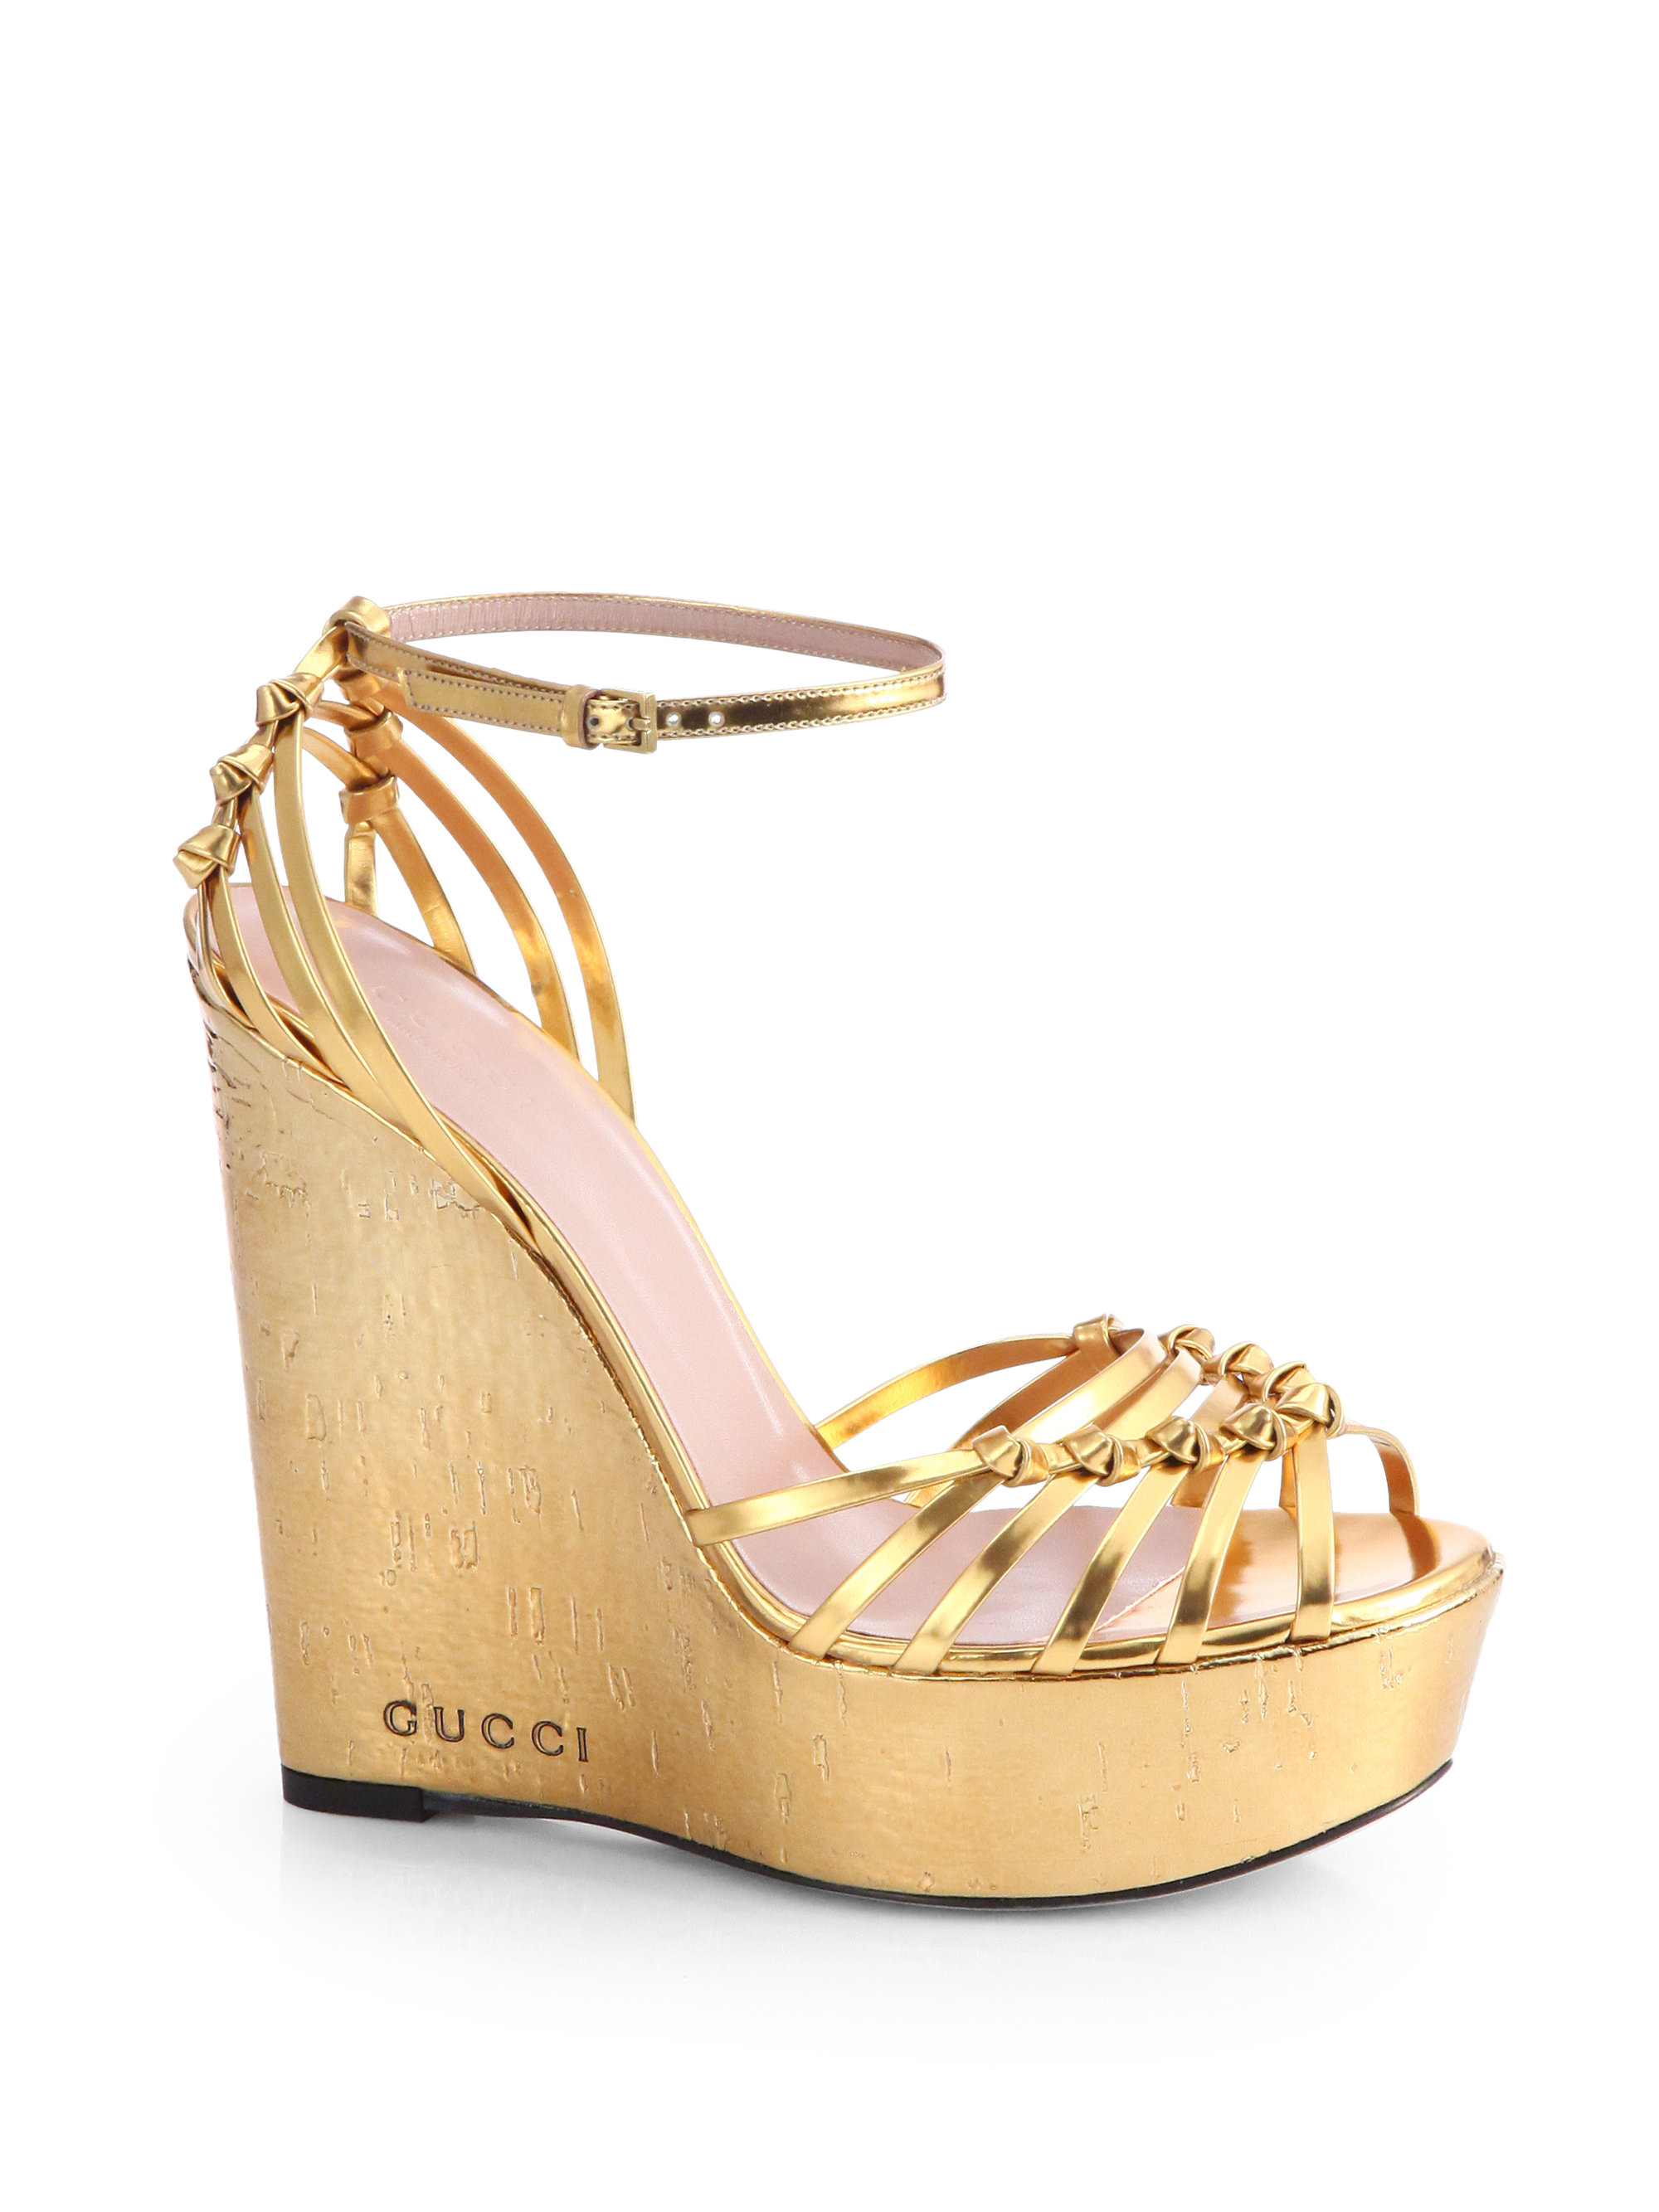 Gucci Metallic Leather Cork Wedge Sandals in Gold | Lyst